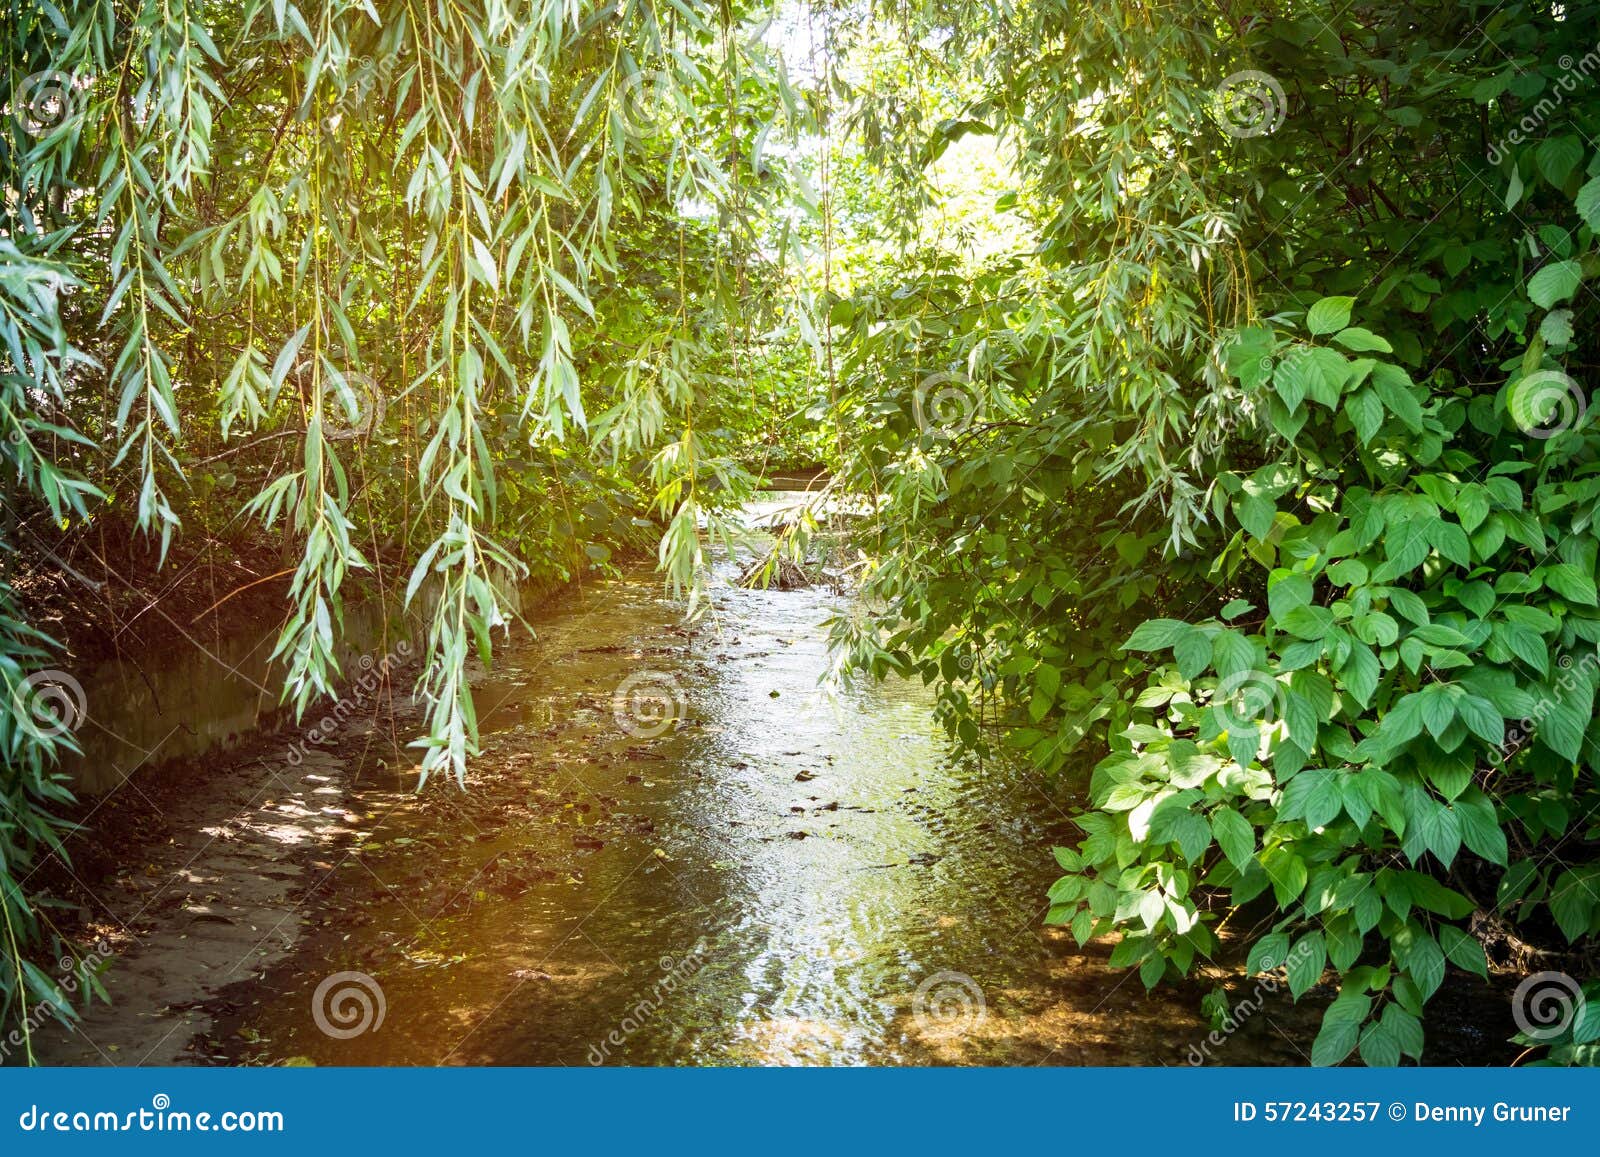 Overgrown river stock image. Image of sunny, reflection - 57243257